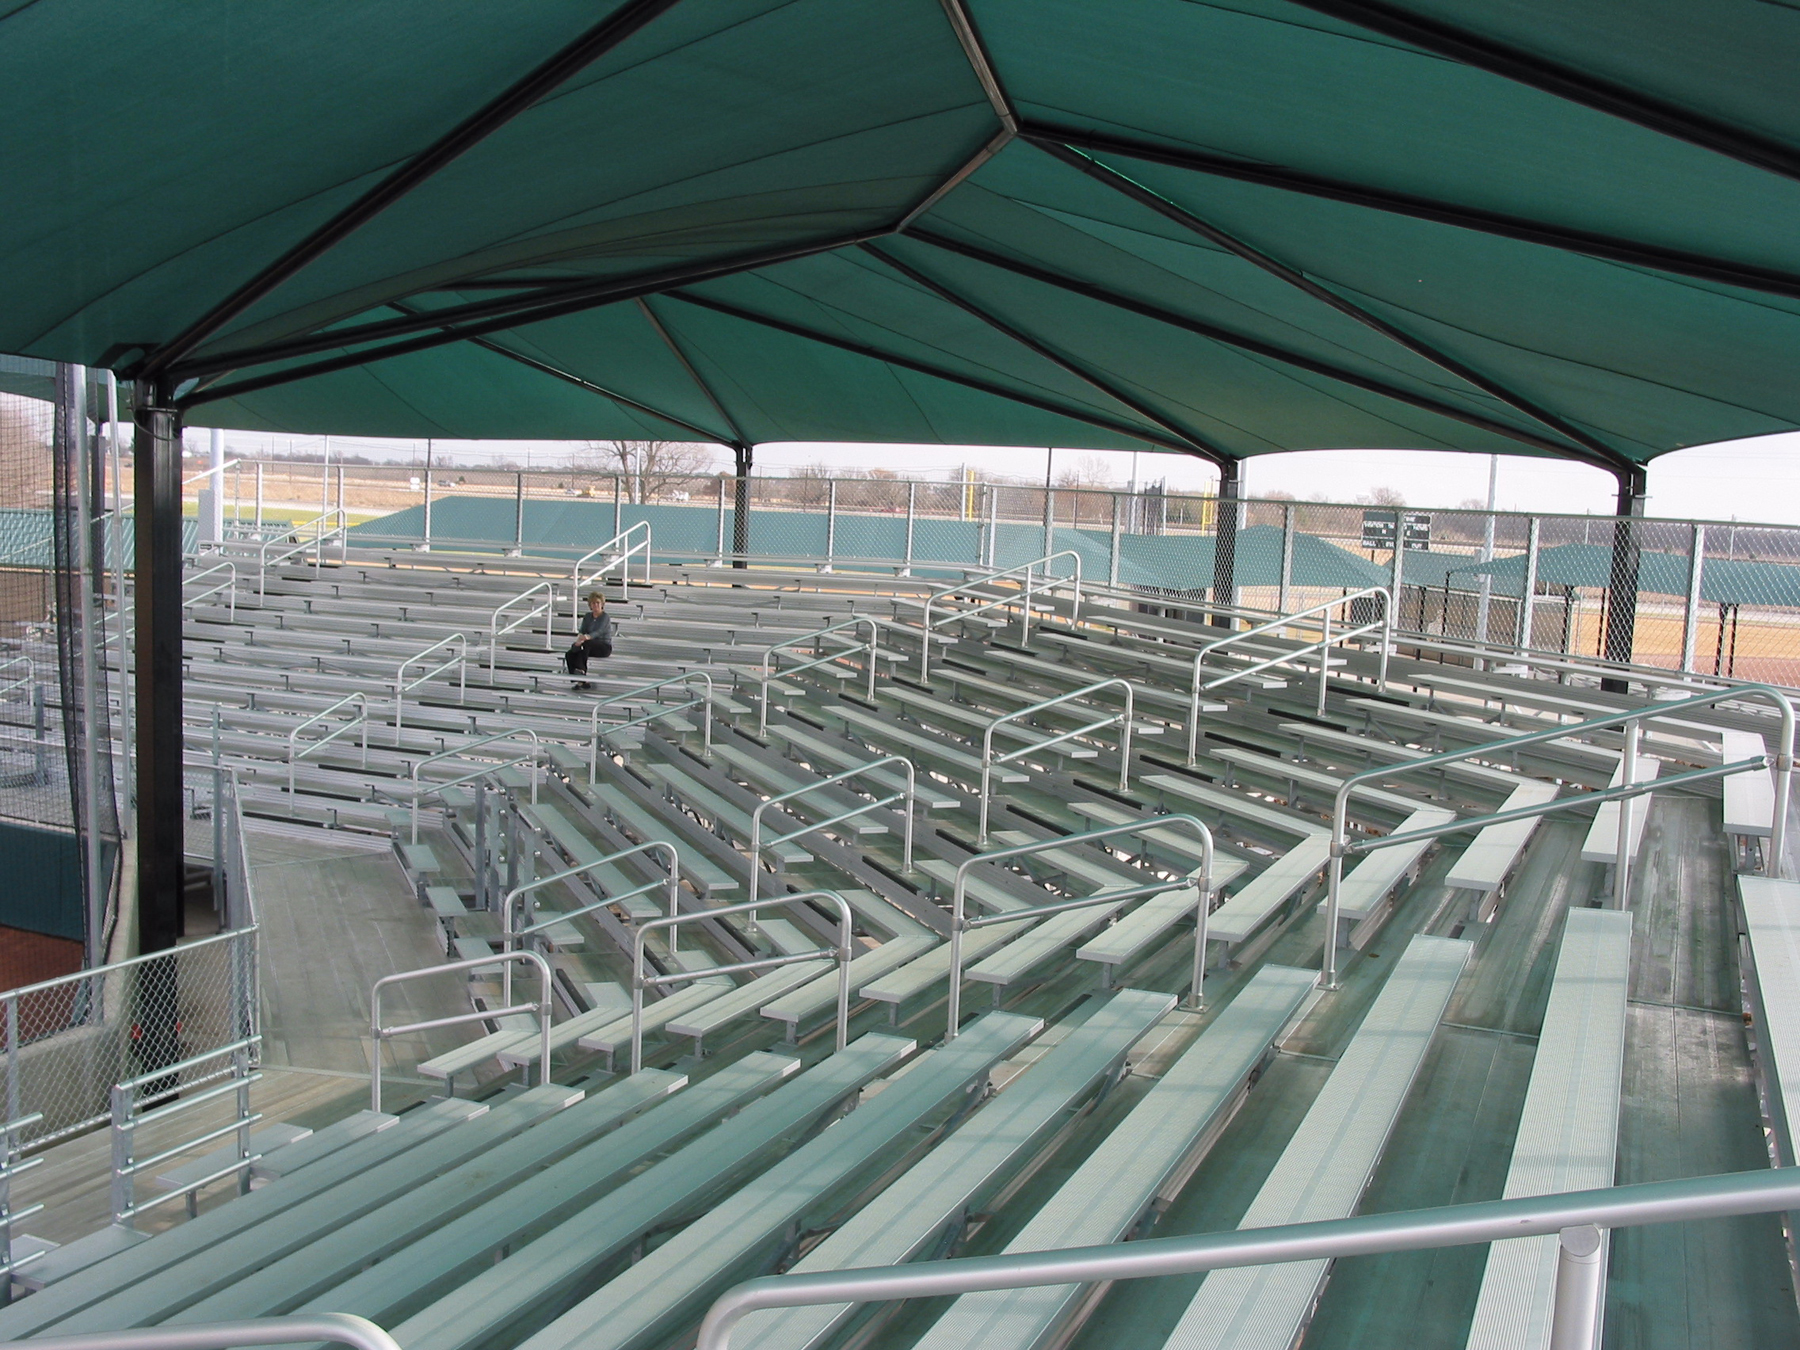 outdoor bleachers covered by usa shades